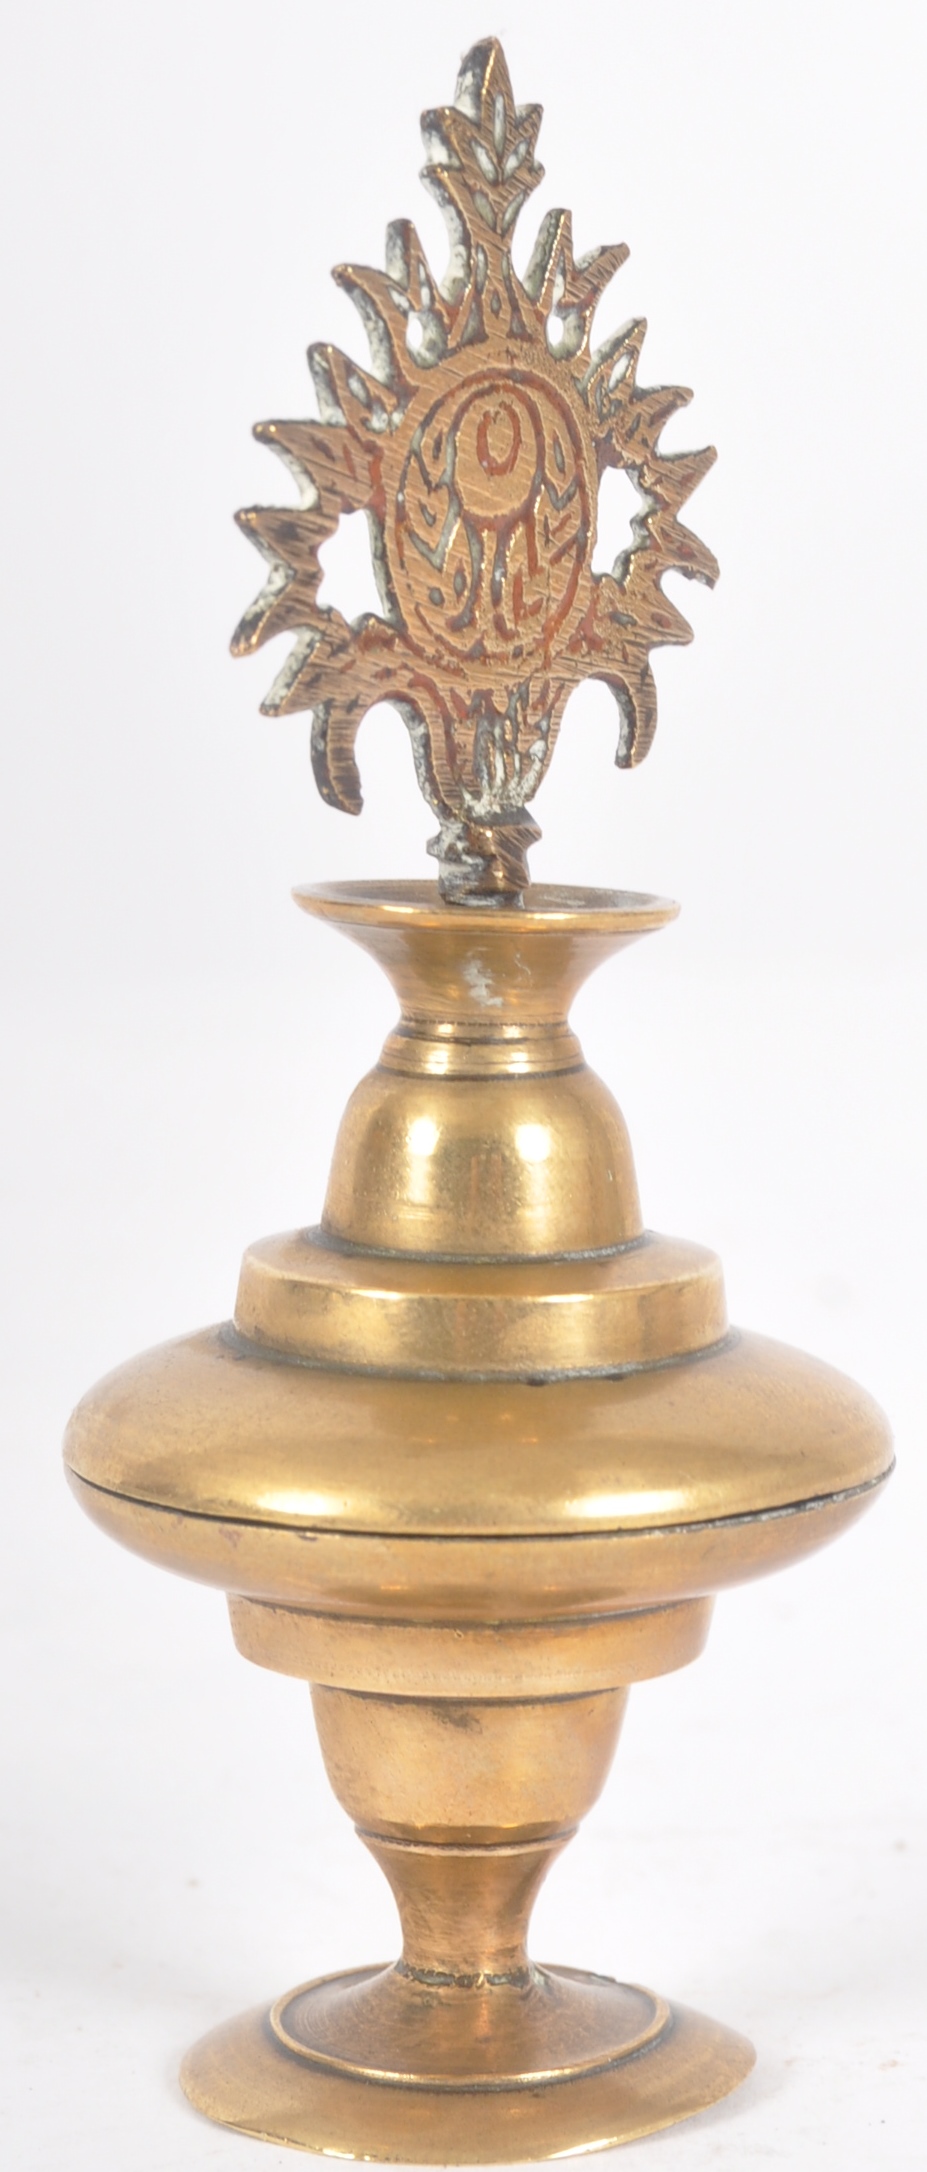 EARLY 20TH CENTURY PERSIAN BRASS KOHL POT - Image 2 of 8